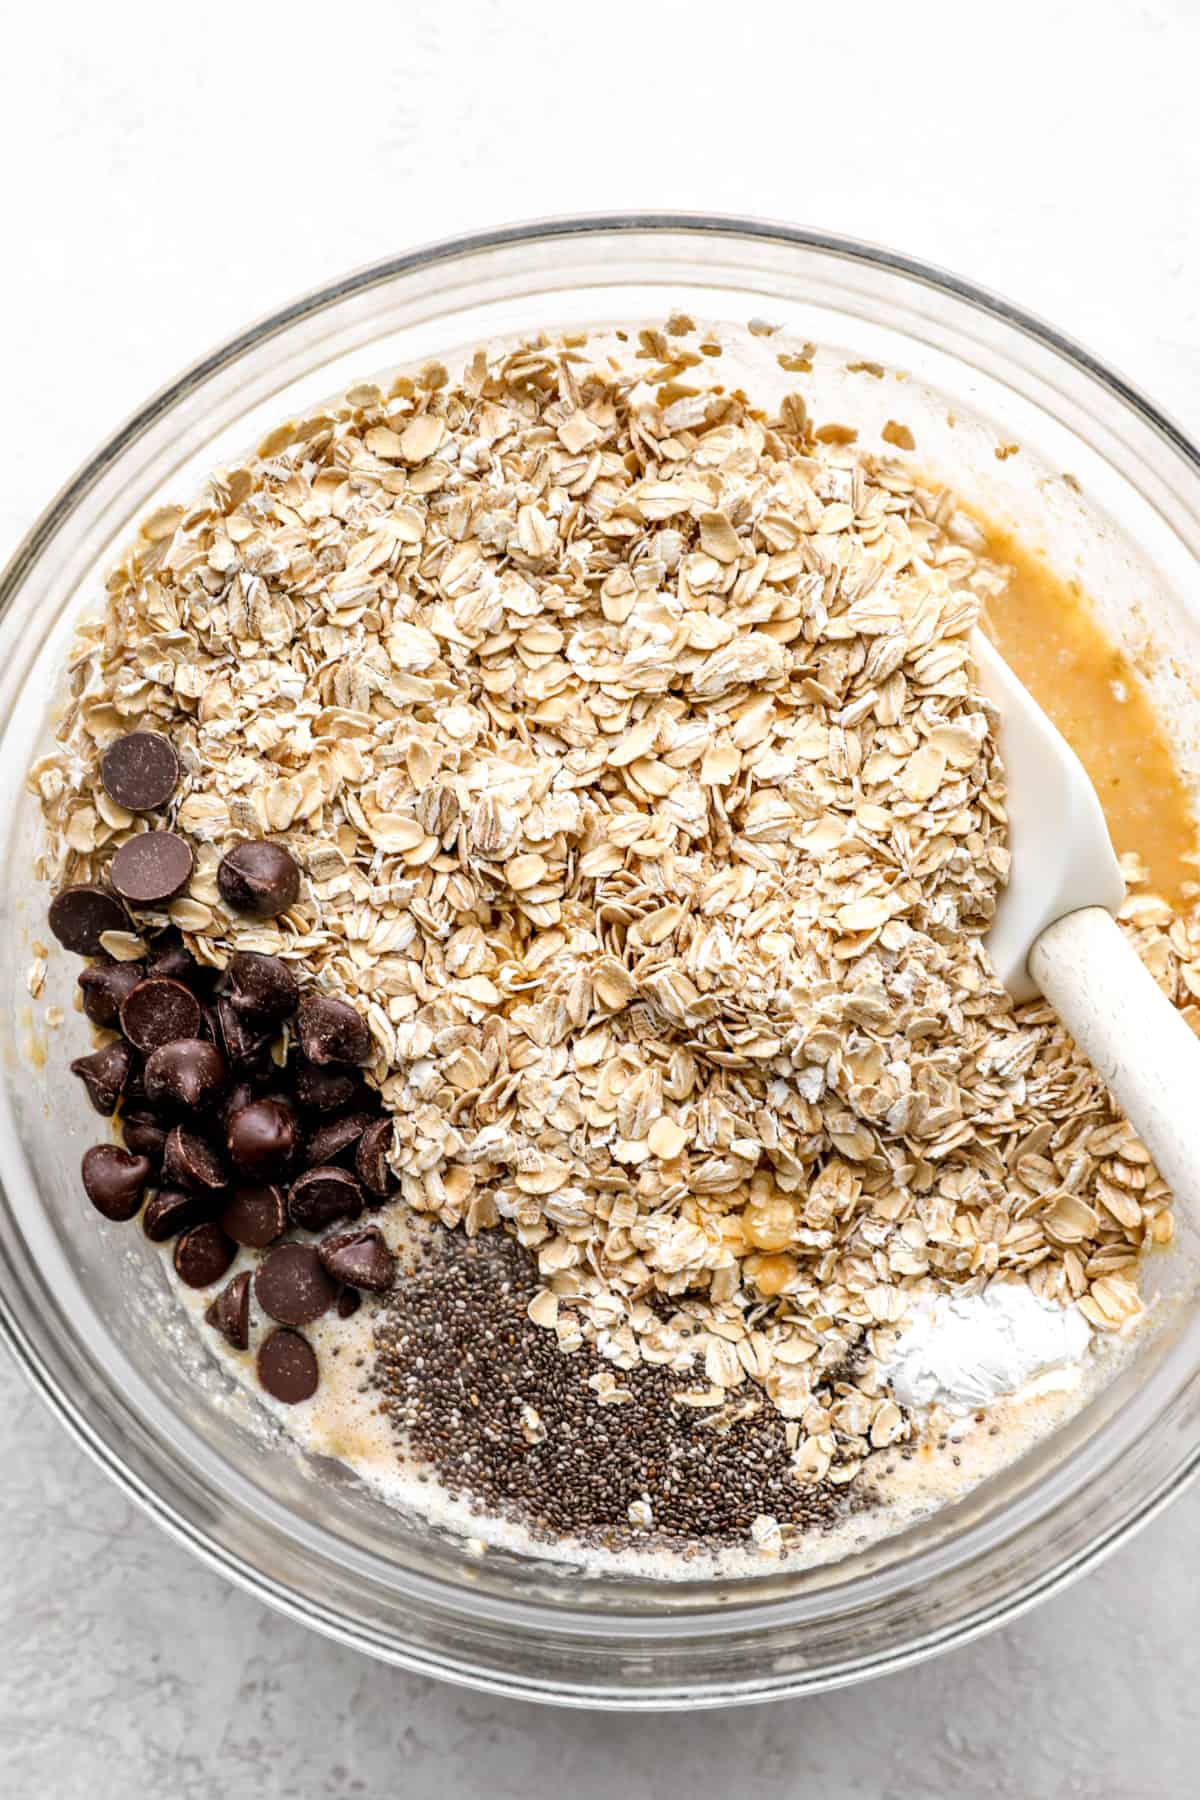 baked oatmeal ingredients unmixed in a bowl.